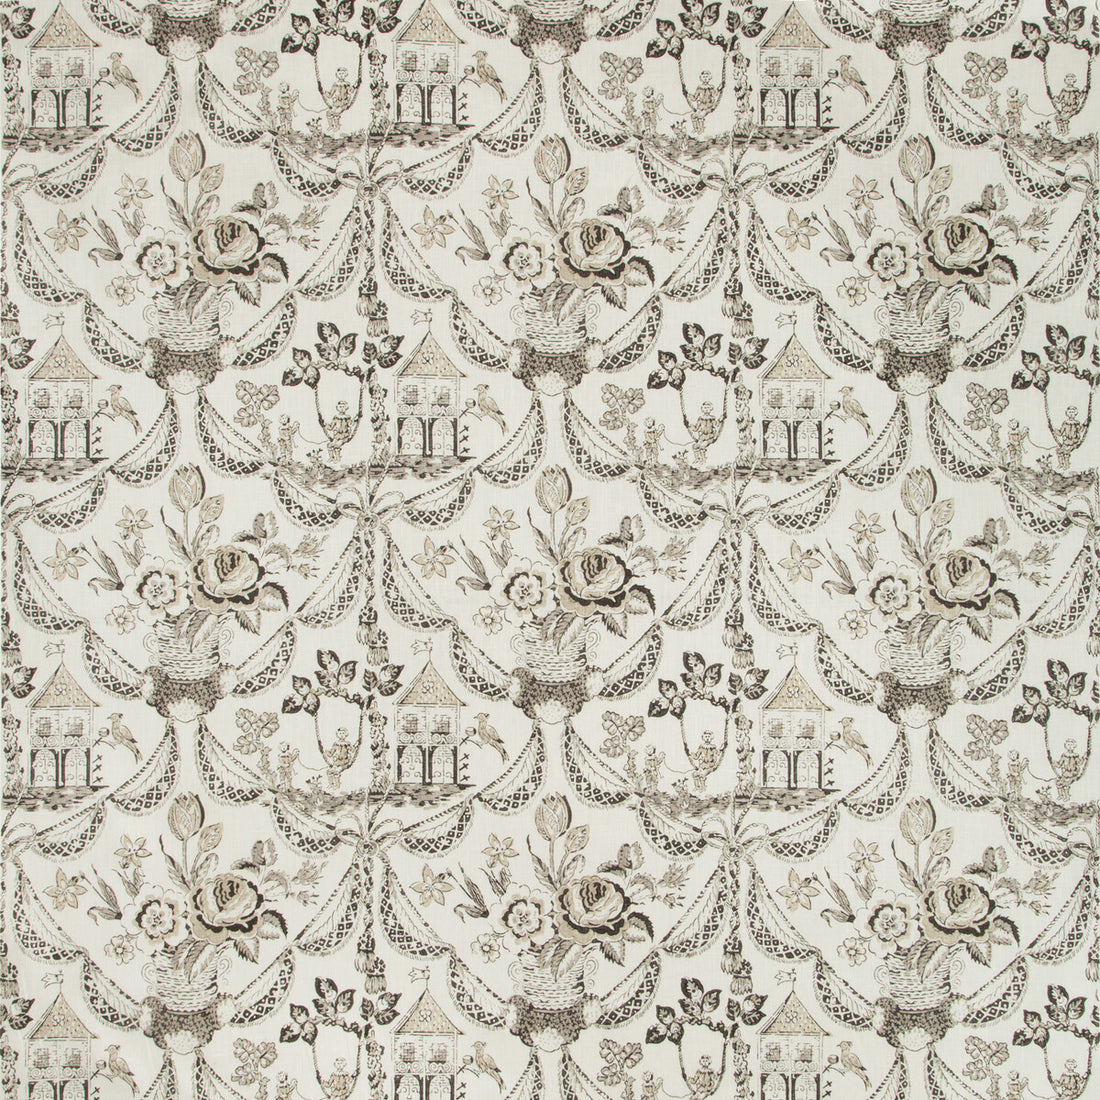 Bird &amp; Swing Hb fabric in charcoal color - pattern 8019100.8.0 - by Brunschwig &amp; Fils